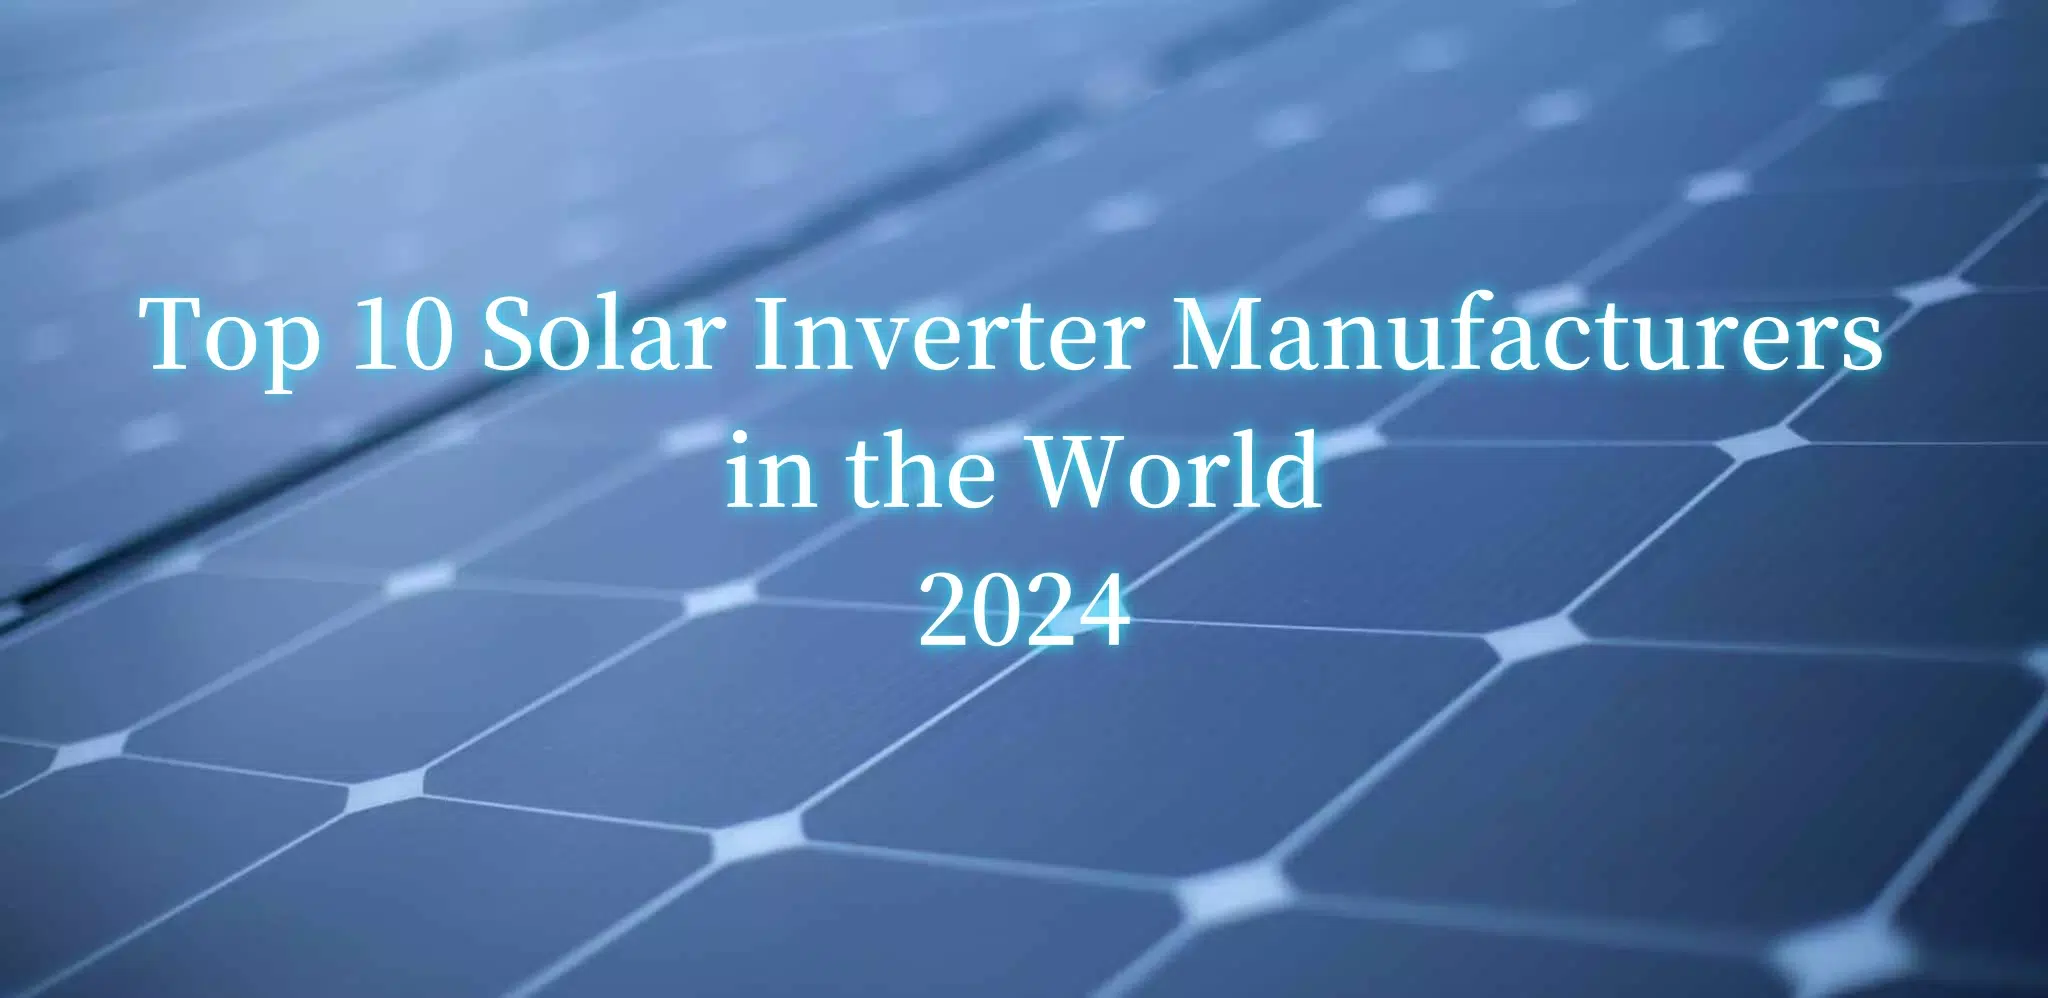 Top 10 Solar Inverter Manufacturers in the World 2024